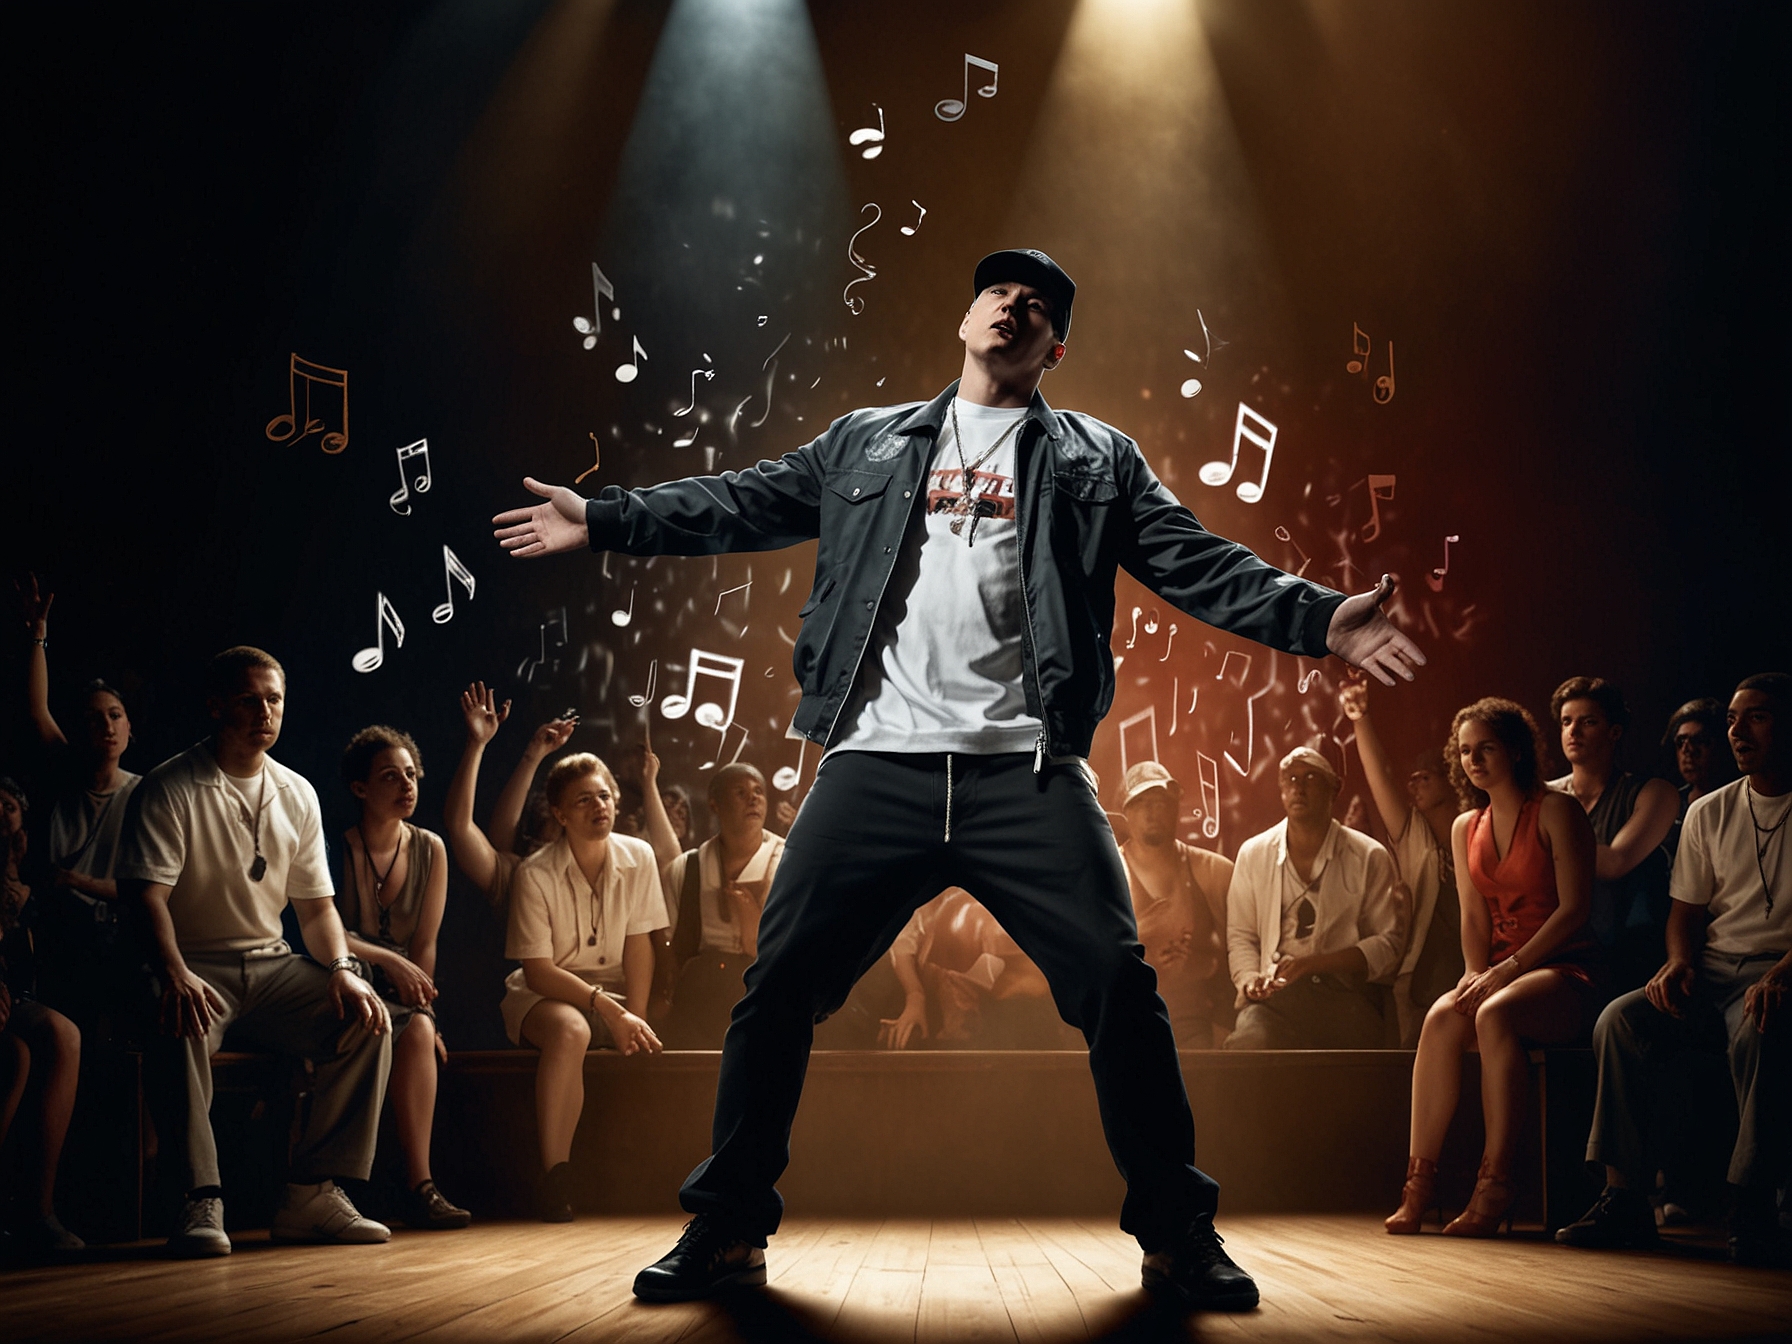 Eminem performing 'Houdini' on stage, with a visual representation of musical notes from the 1980s song he sampled. The image illustrates the fusion of old and new elements.